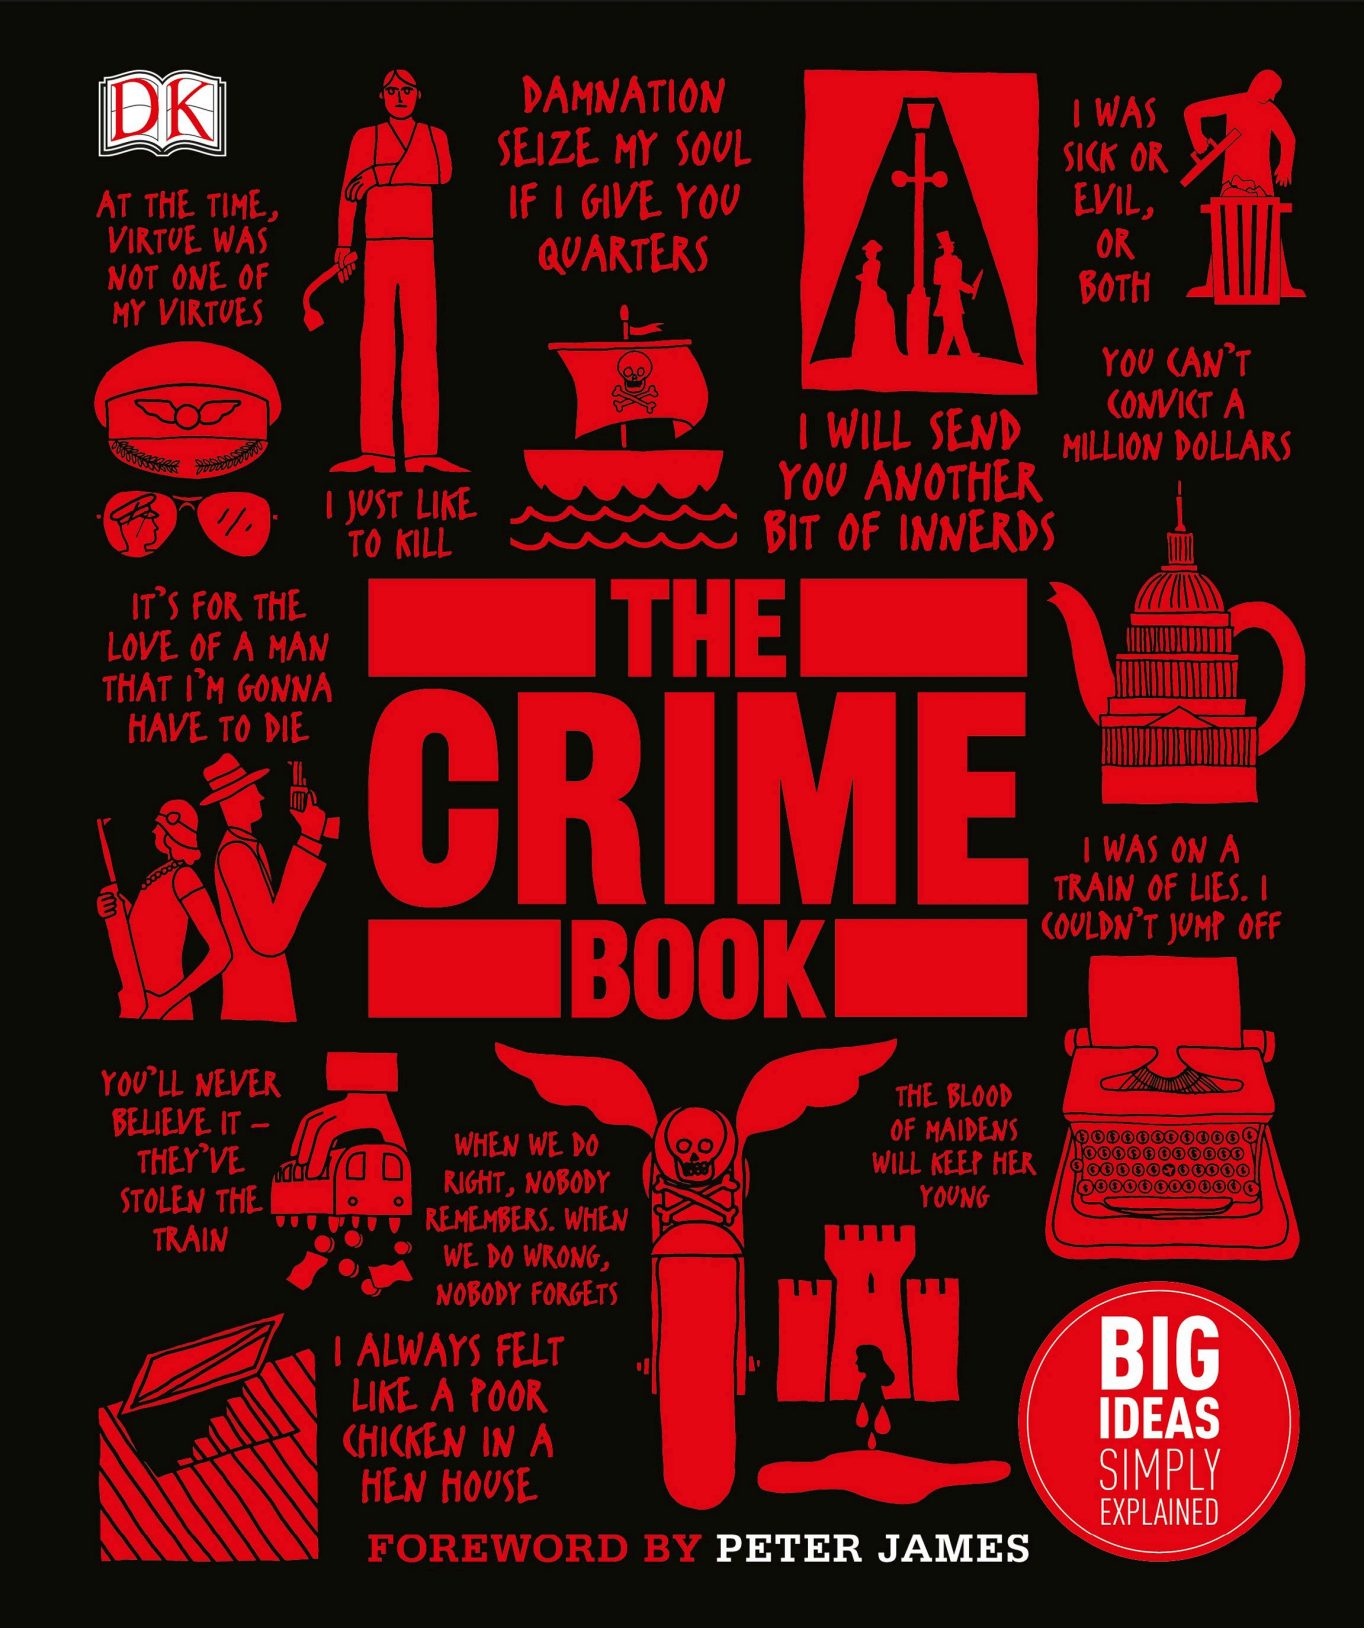 Rich Results on Google's SERP when searching for 'The Crime Book'